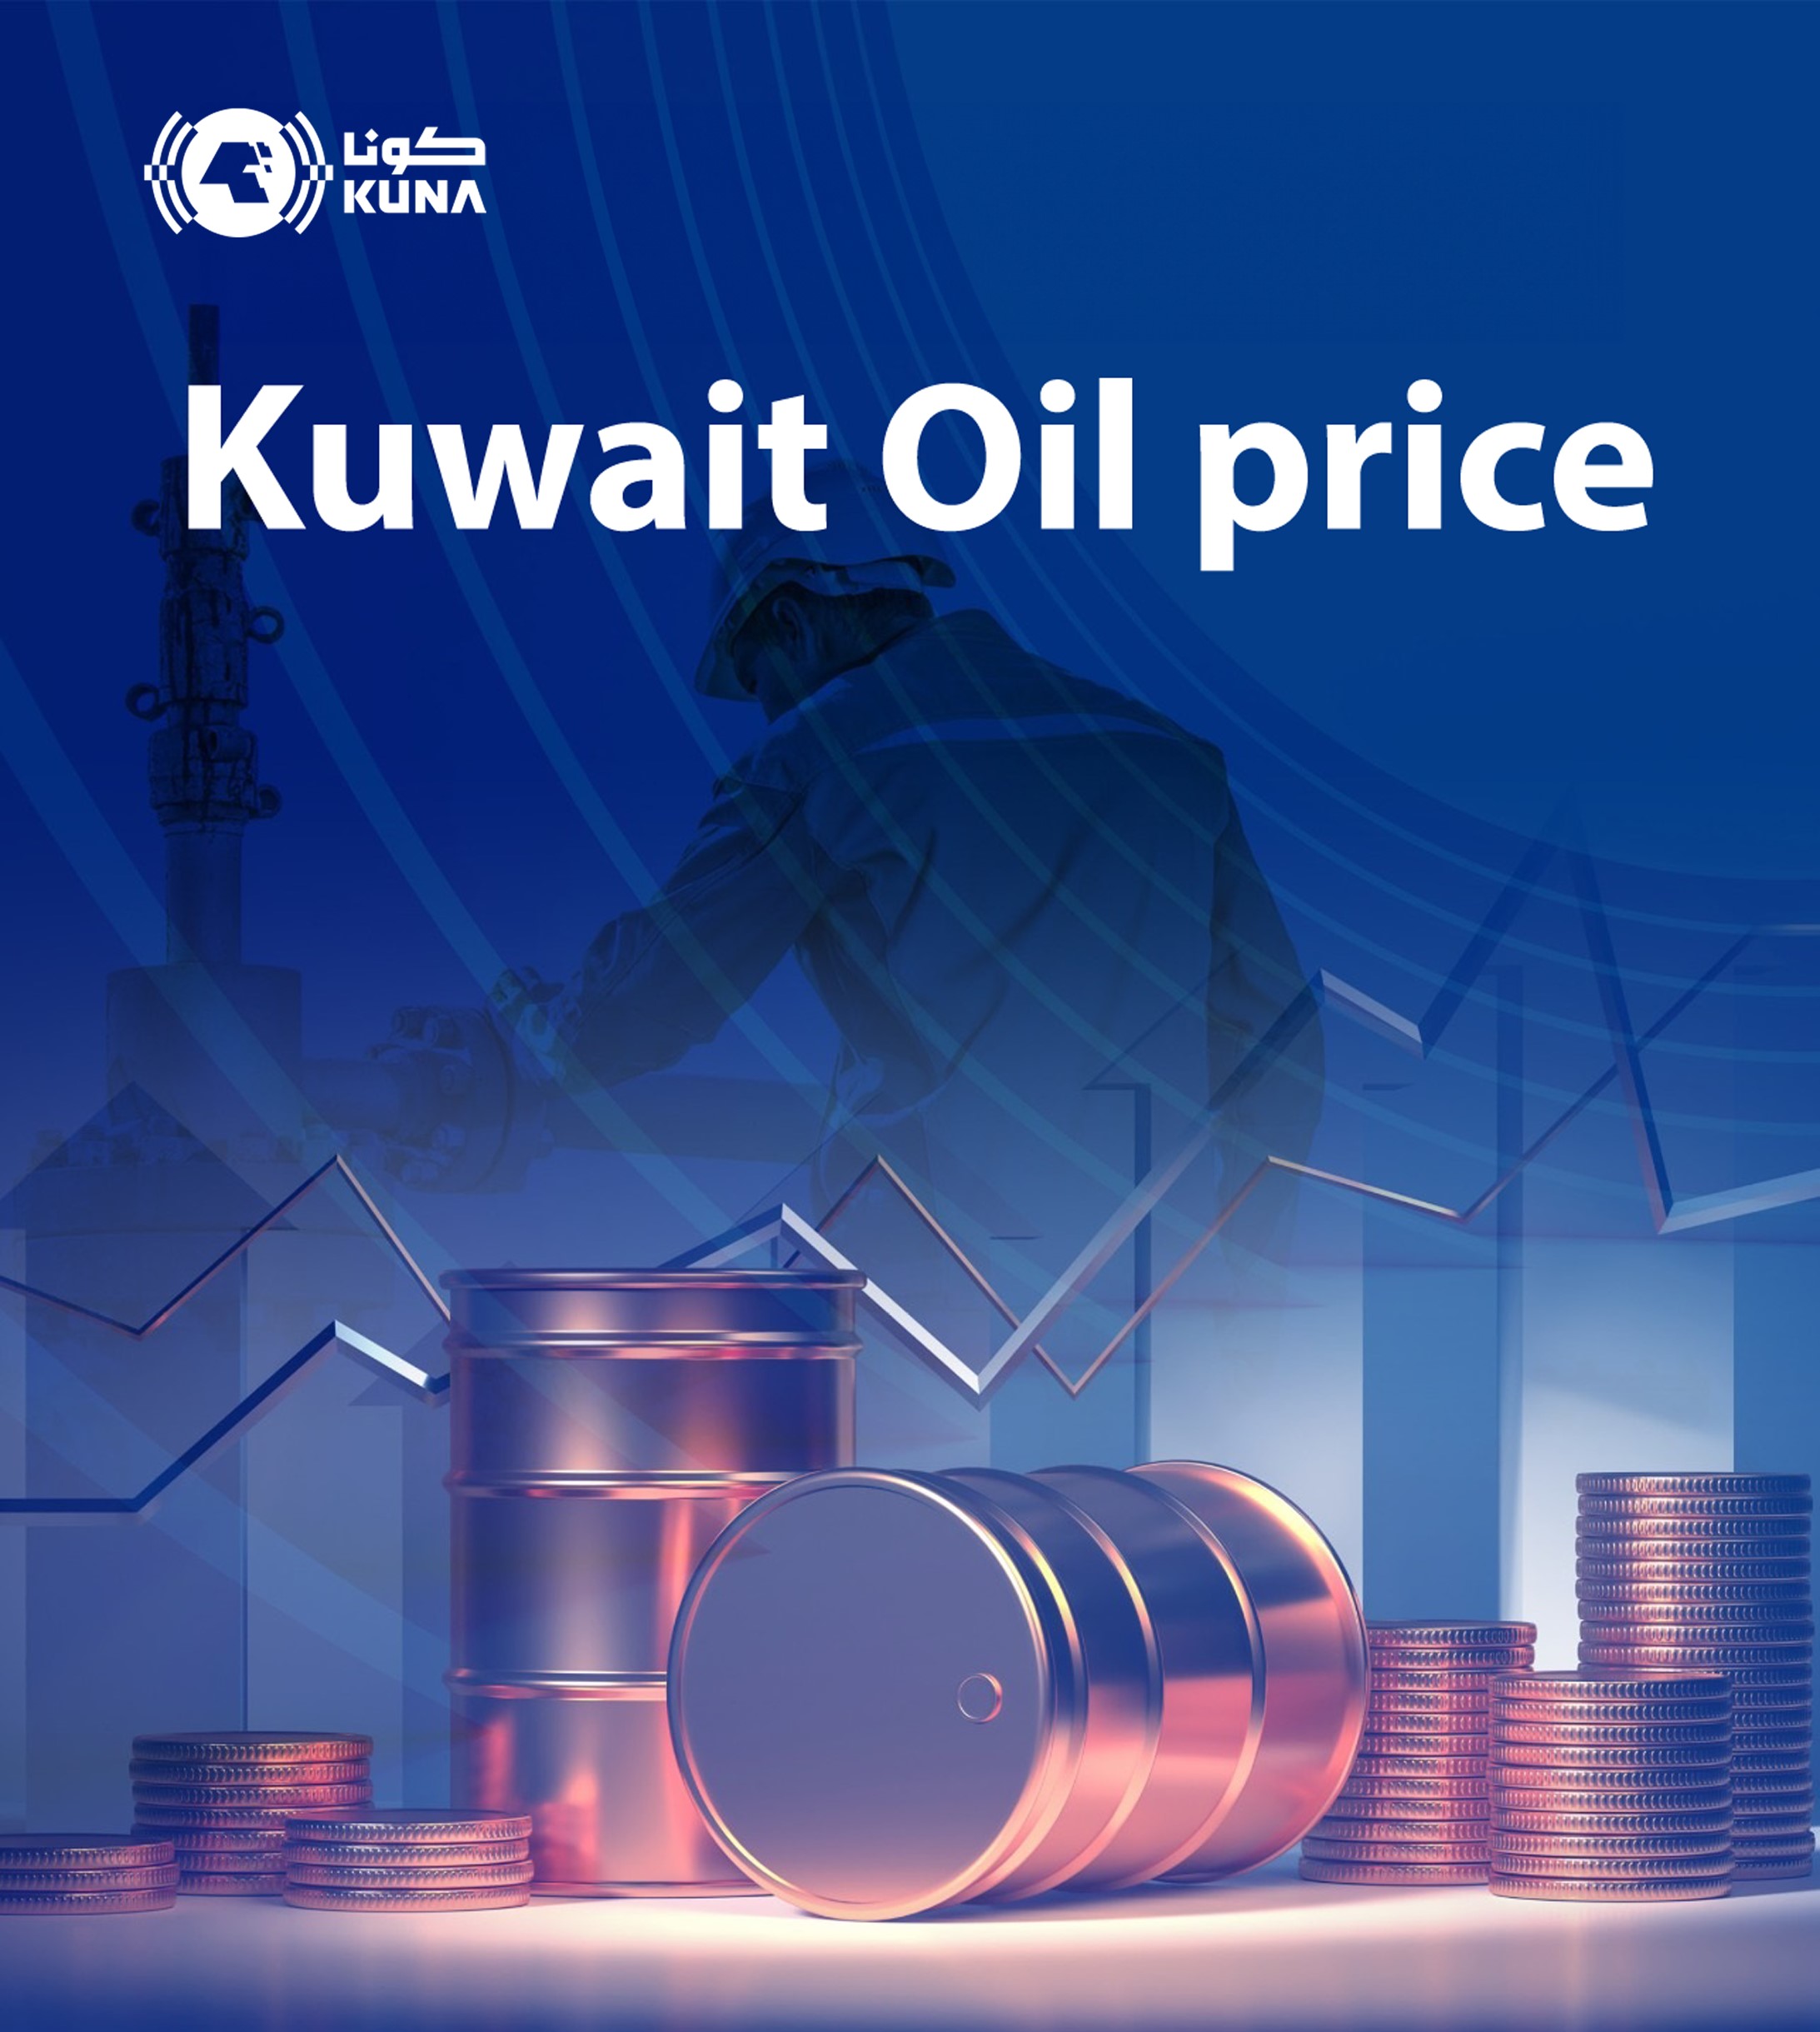 Kuwait oil price up 87 cents to USD 86.44 pb                                                                                                                                                                                                              